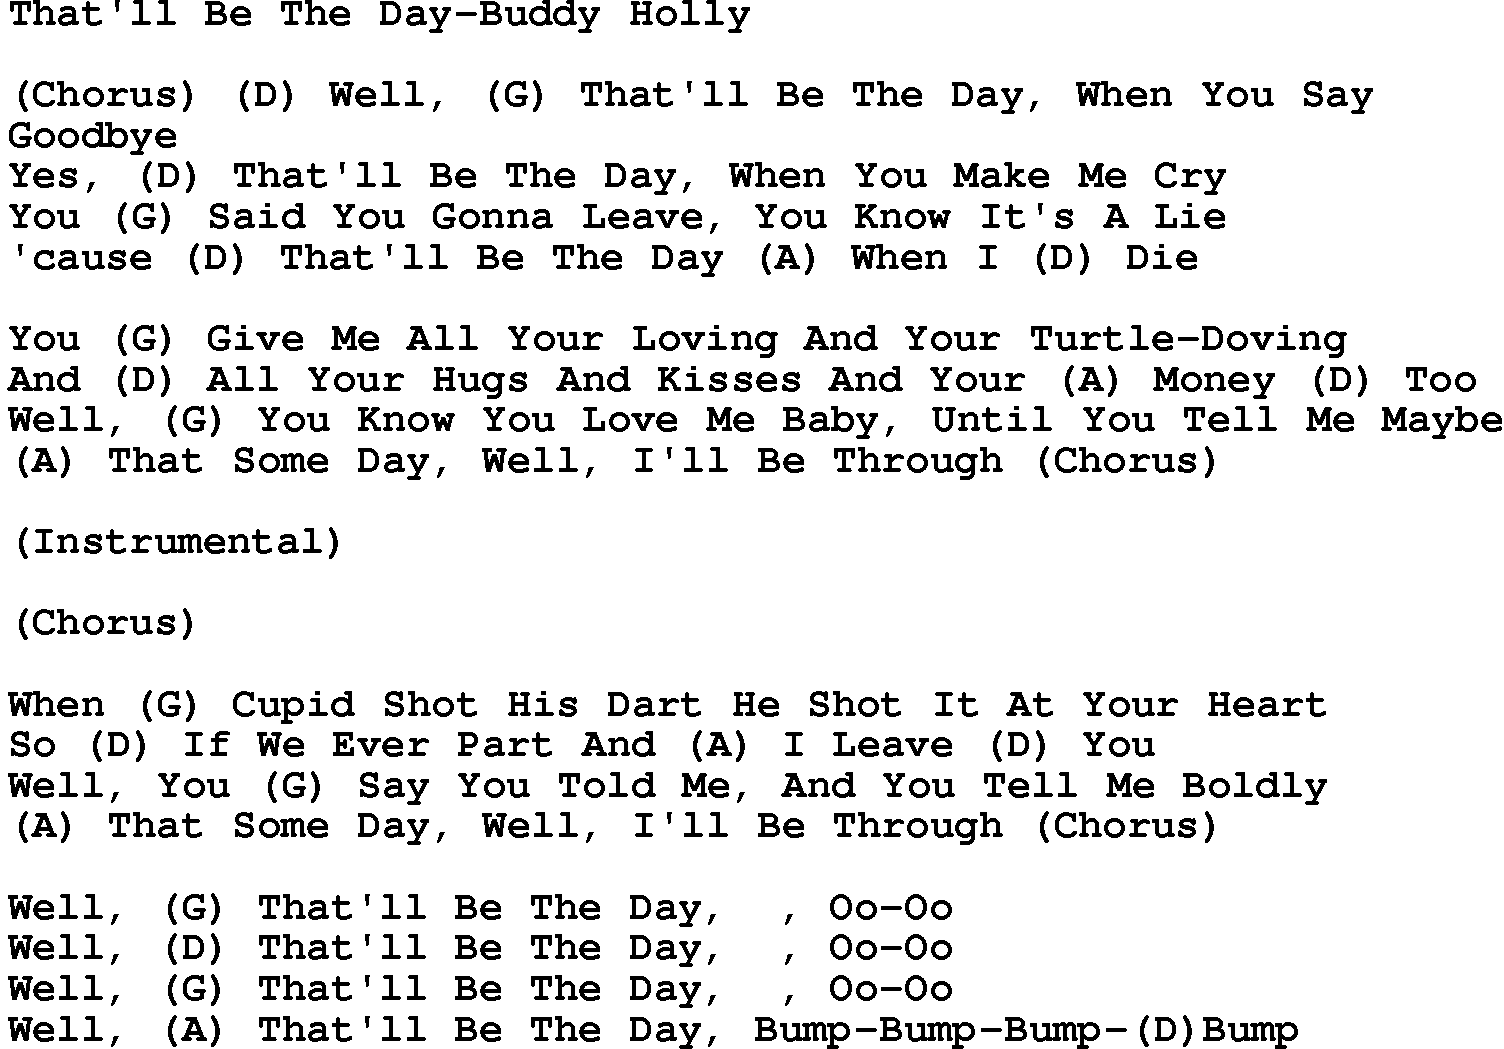 Country music song: That'll Be The Day-Buddy Holly lyrics and chords